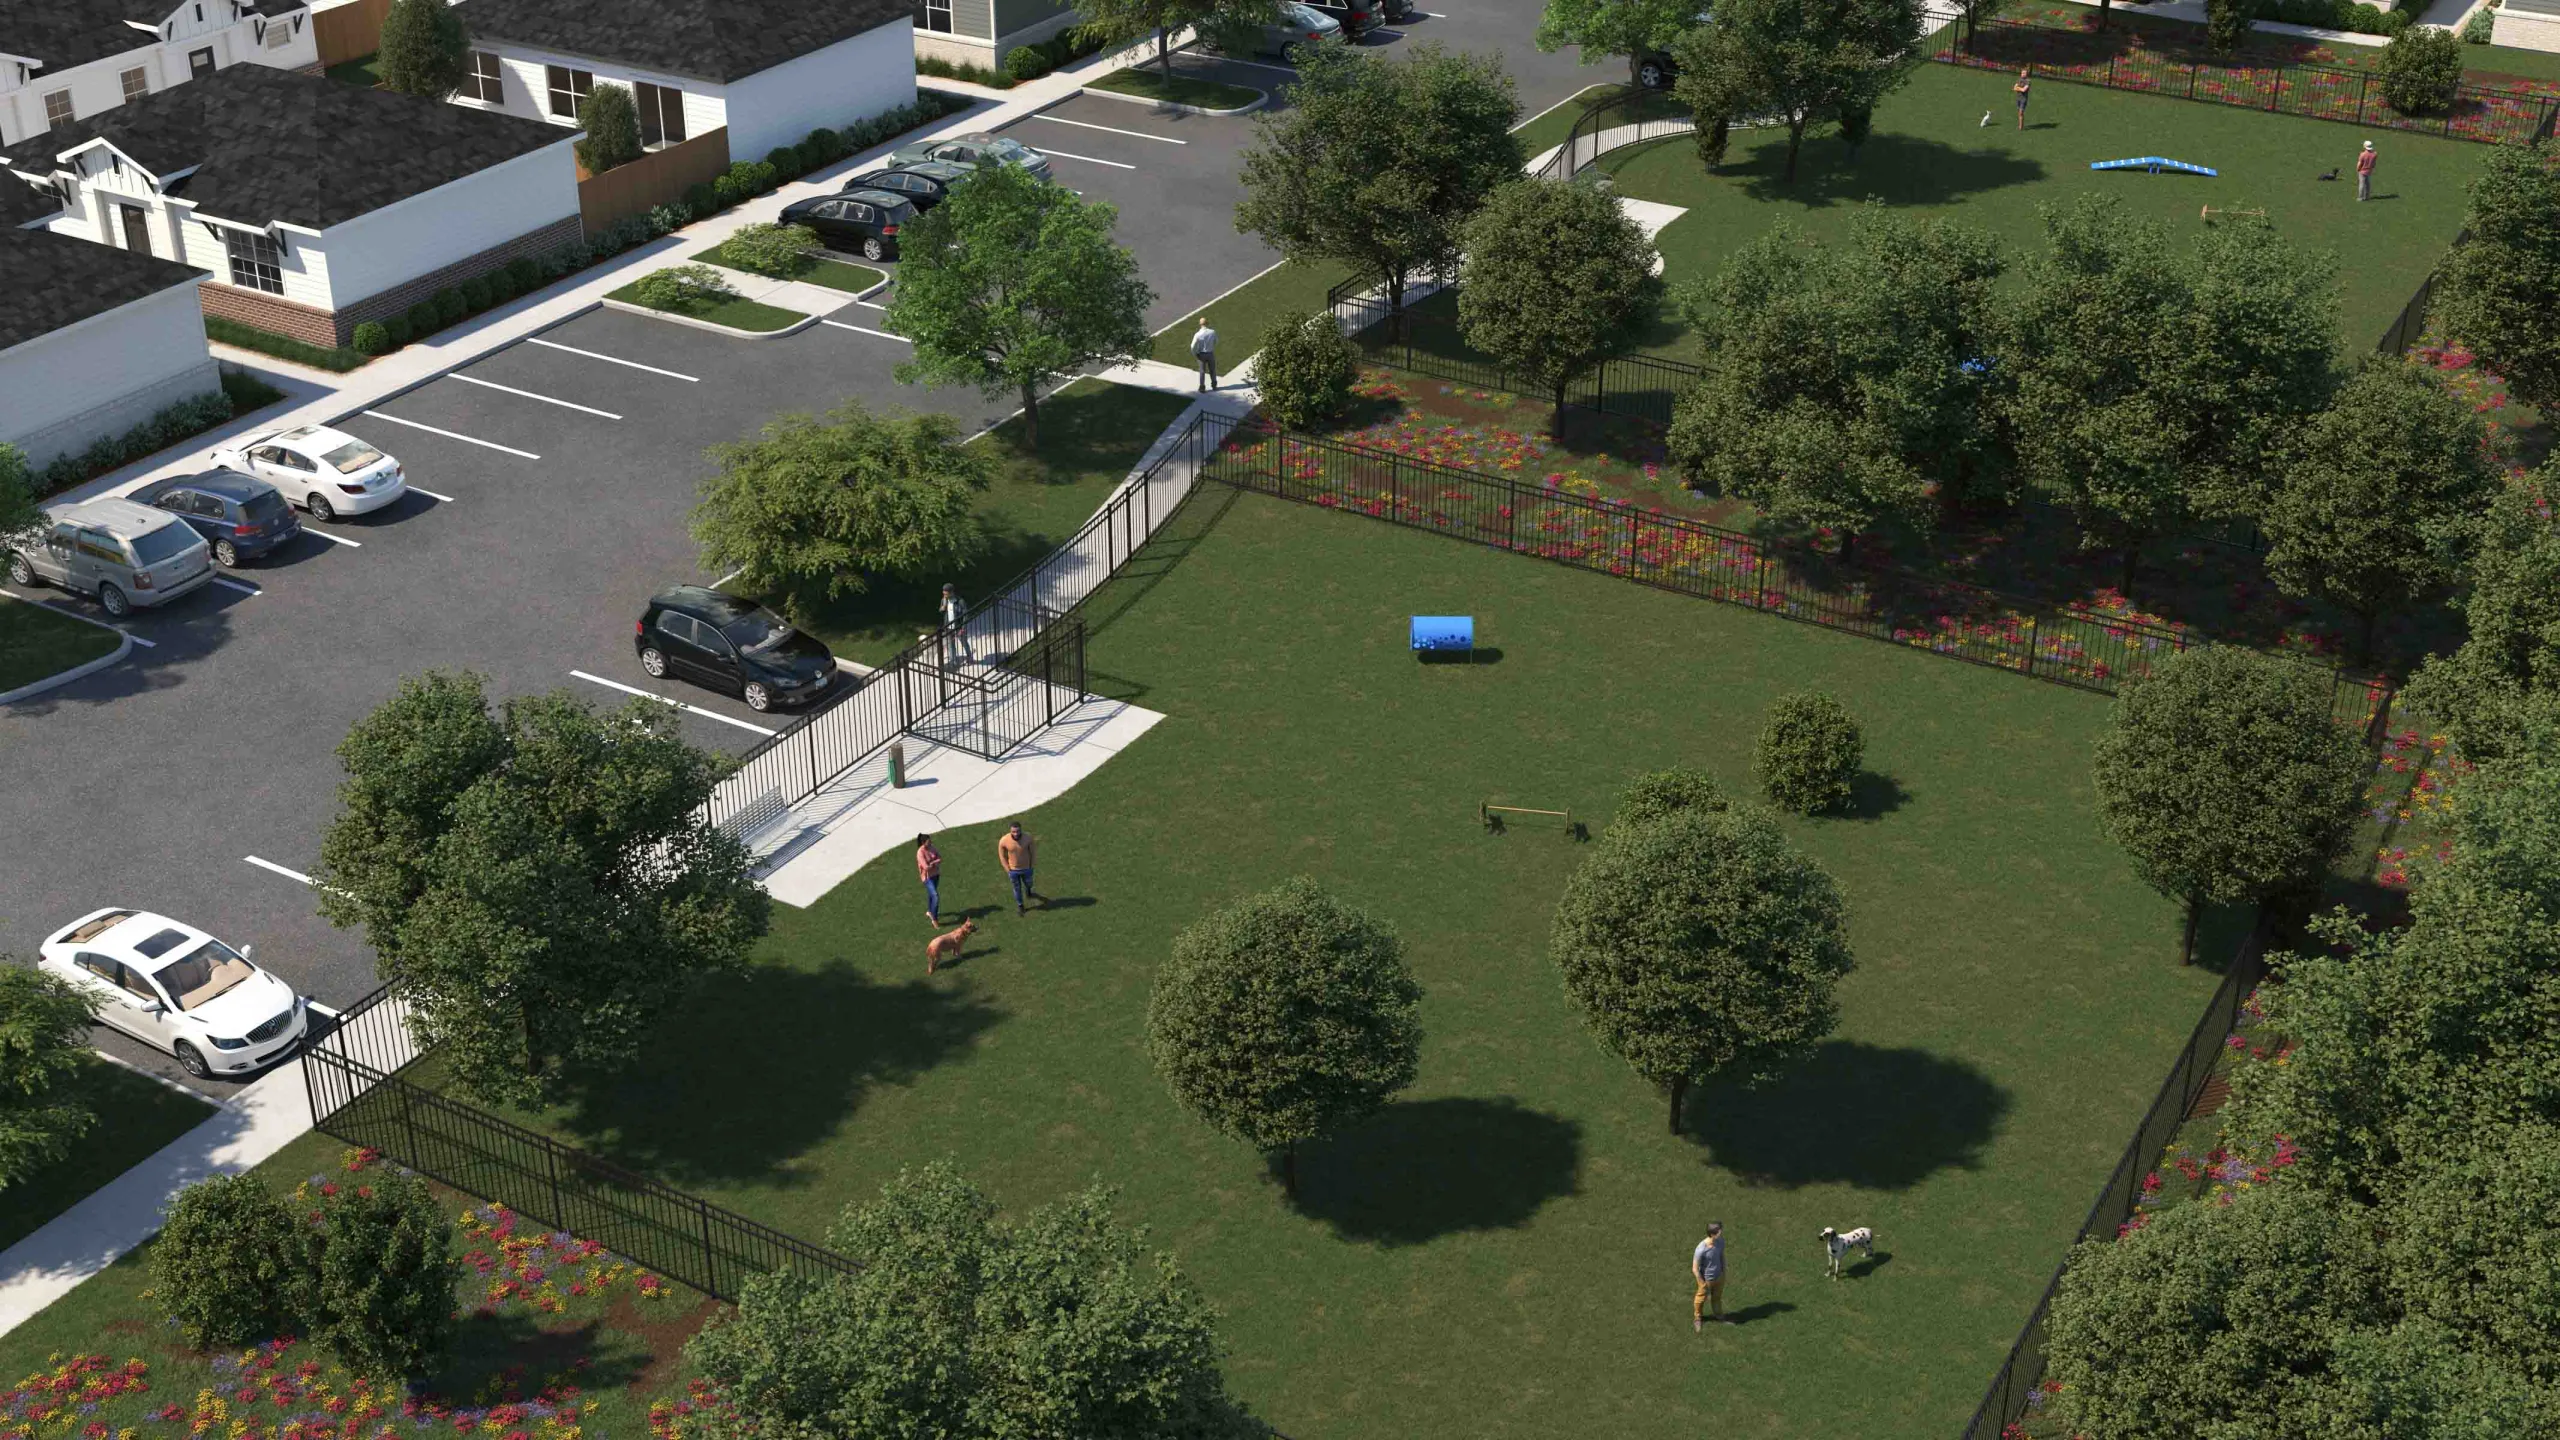 Dog park amenity rendering, Yardly is a pet-friendly complex of cottage-style homes with private backyards and two dog parks onsite. one for small dogs and one for large dogs.